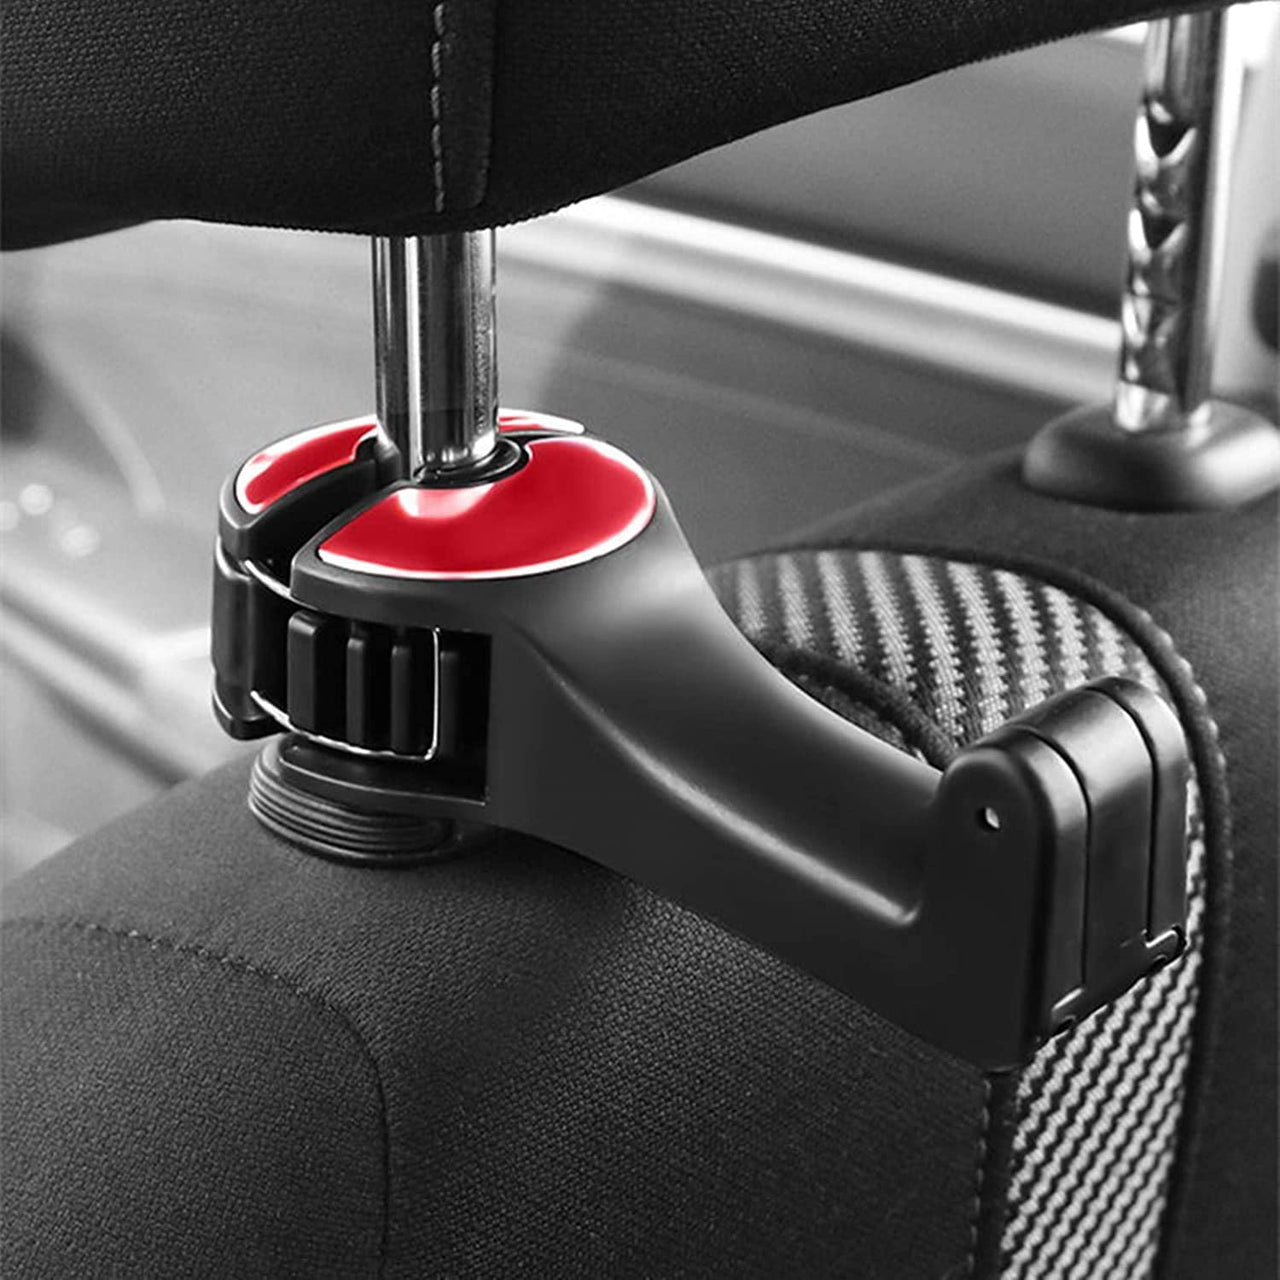 2 in 1 Car Seat Hooks for Purses and Bags with Phone Holder，Automative Headrest Purse Handbag Holder Hangers Organizers,Falling Resistance, Quietness and Universal Fit for All Cars, Car Accessories